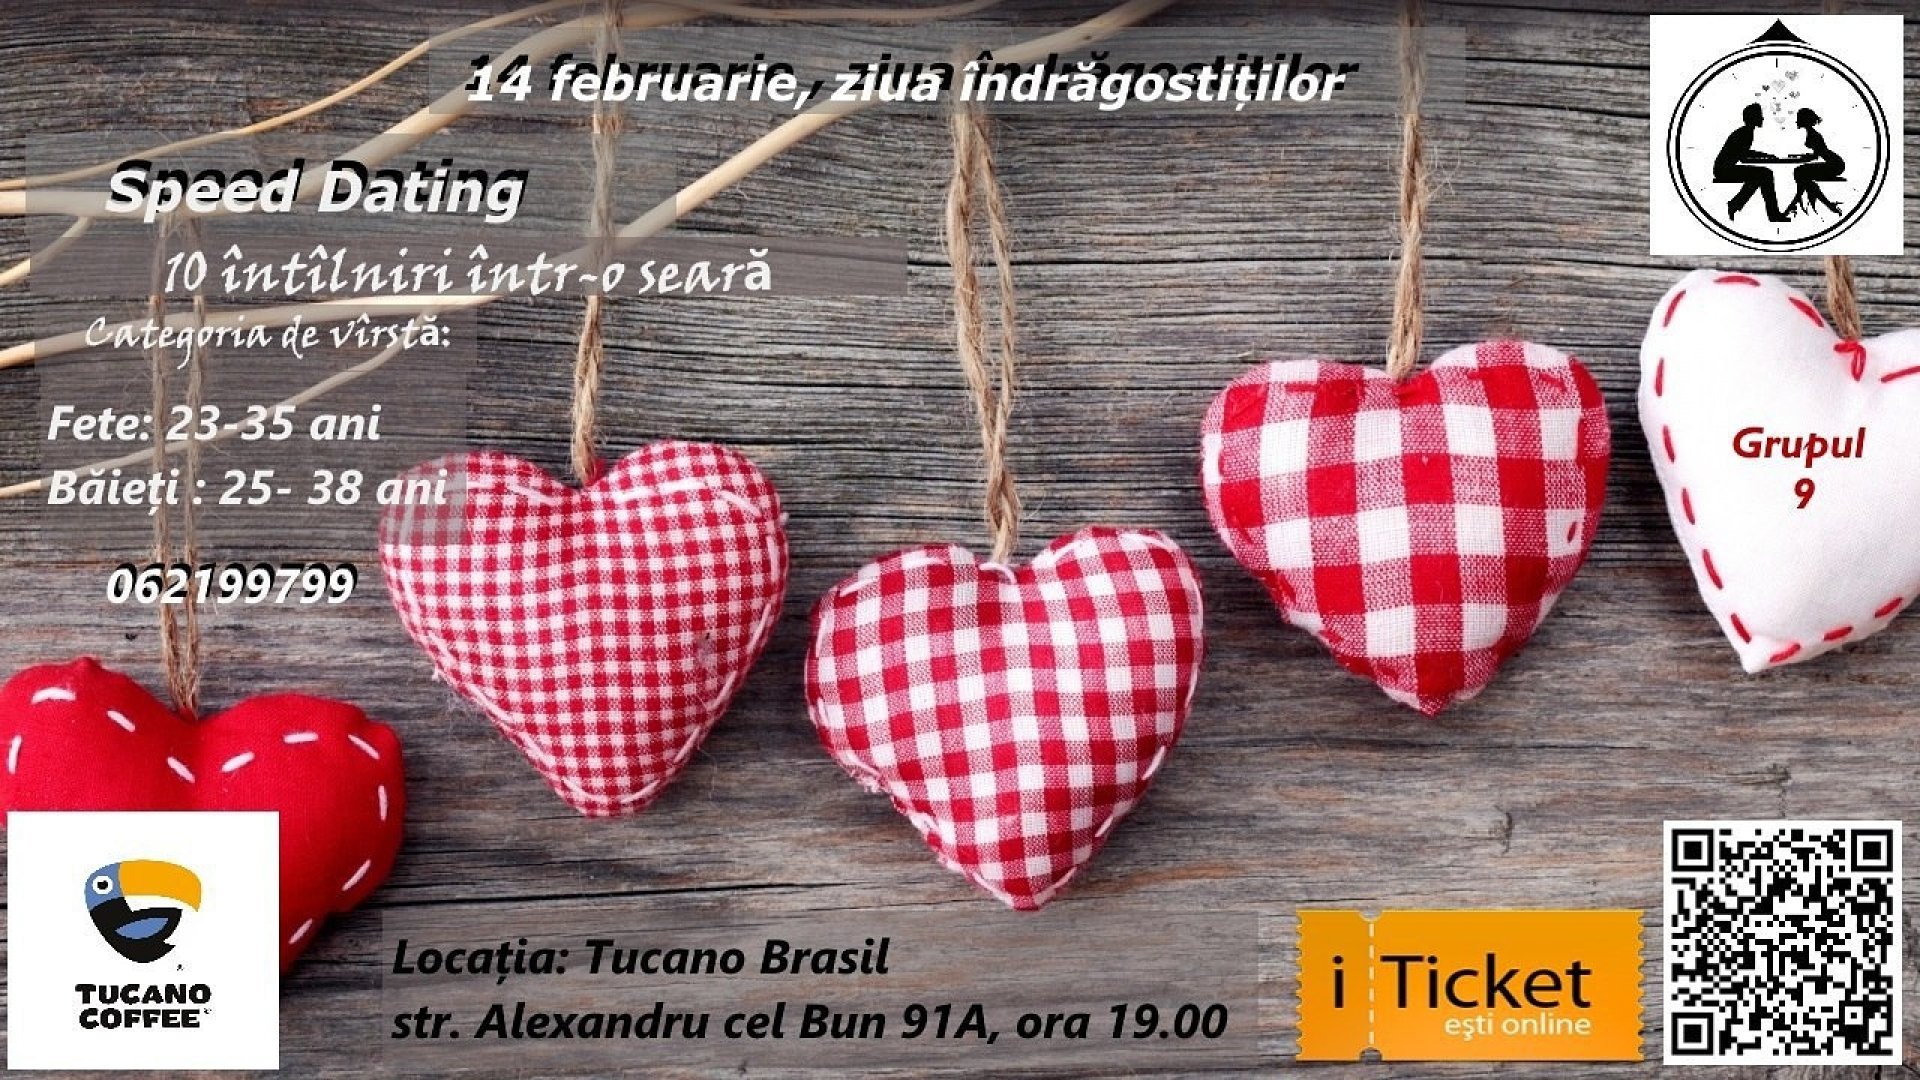 Speed Dating - 14 februarie